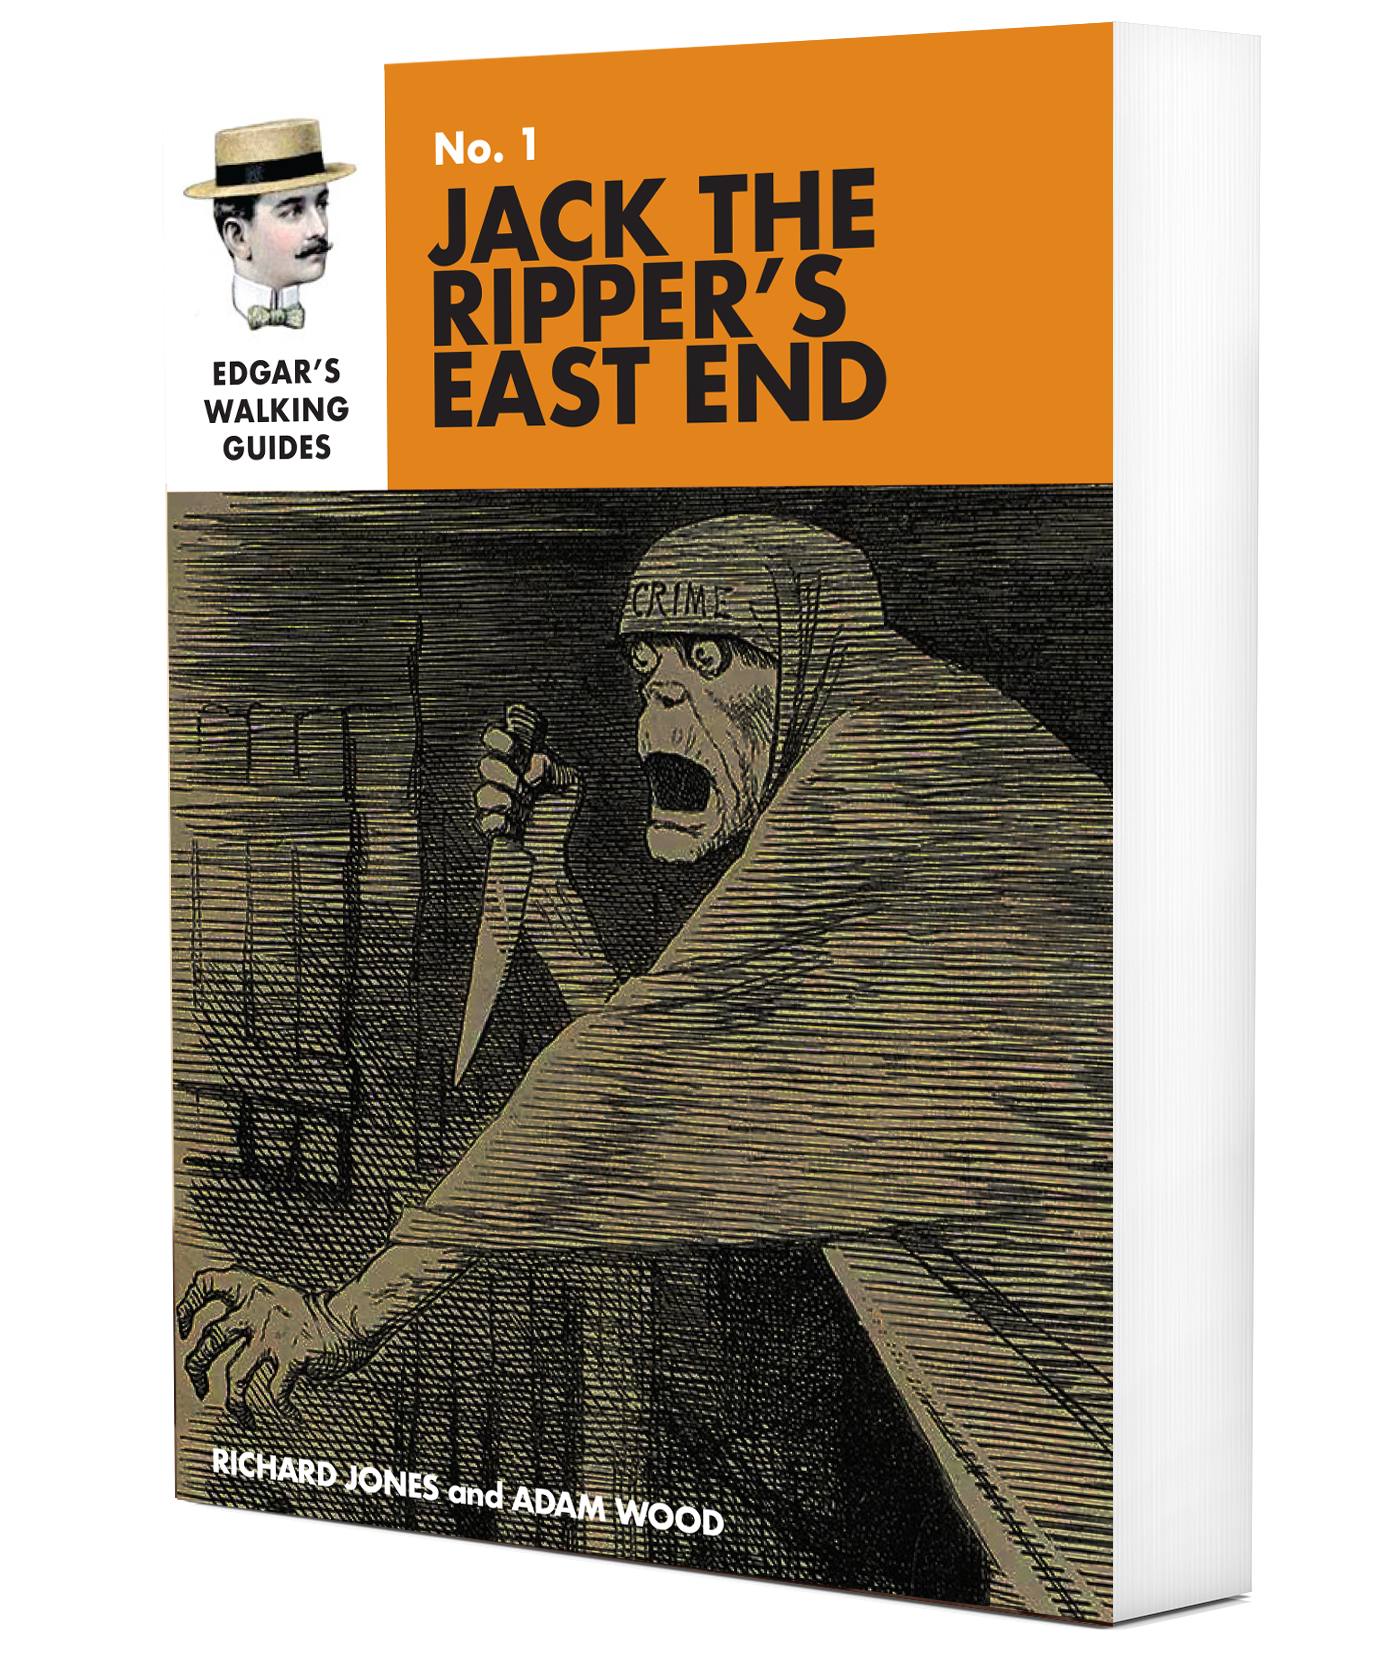 The cover of Jack the Ripper's East End.